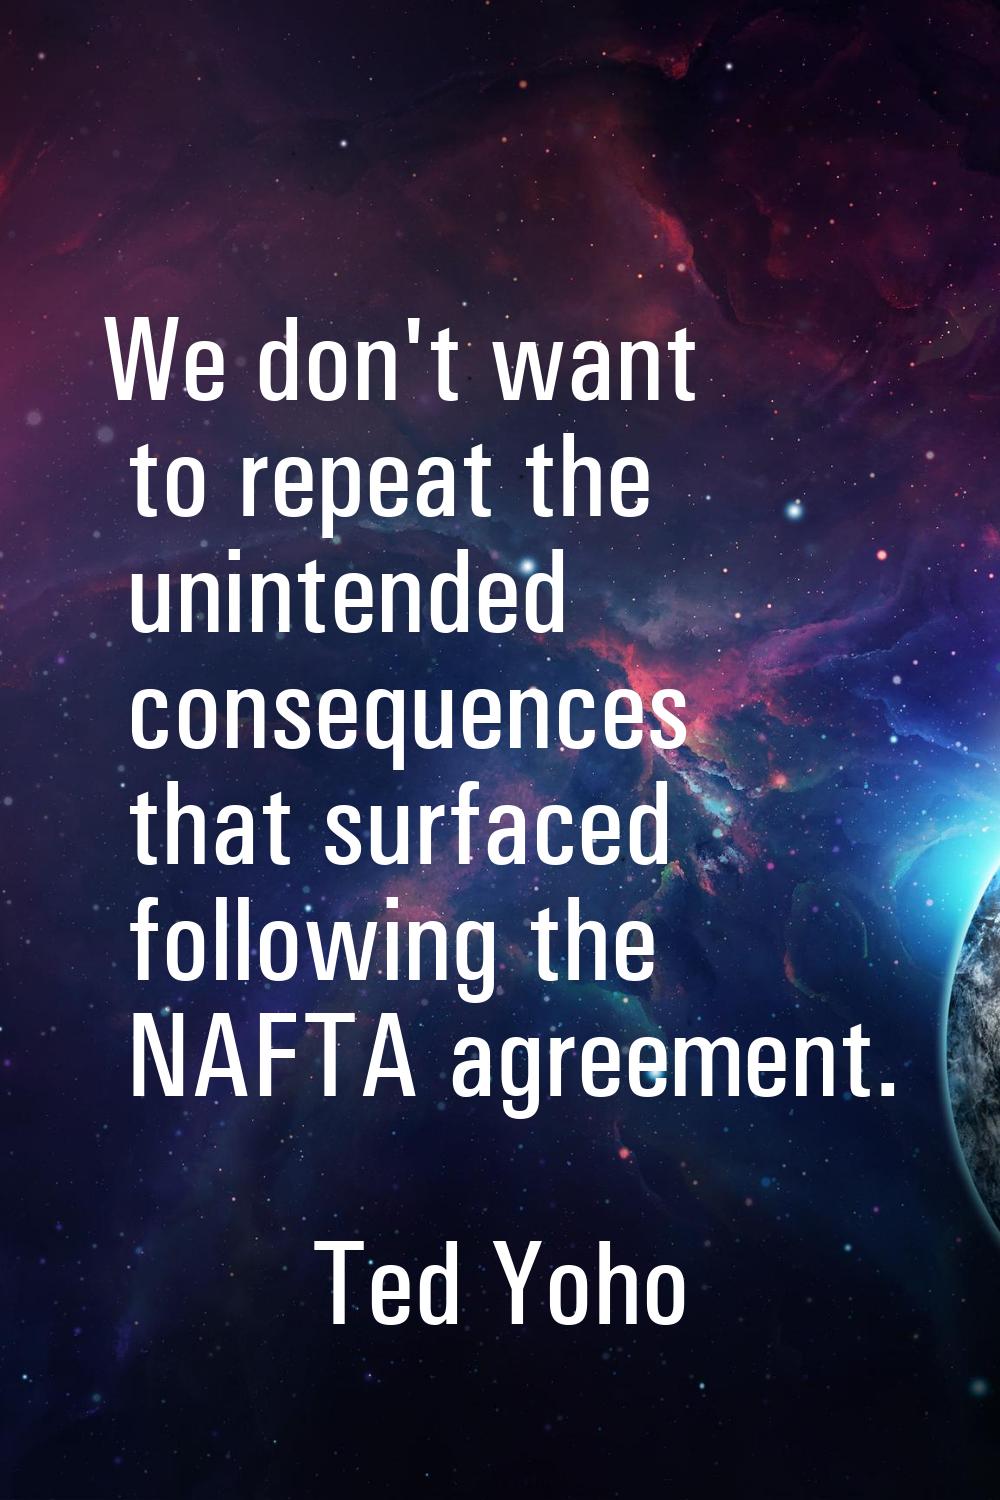 We don't want to repeat the unintended consequences that surfaced following the NAFTA agreement.